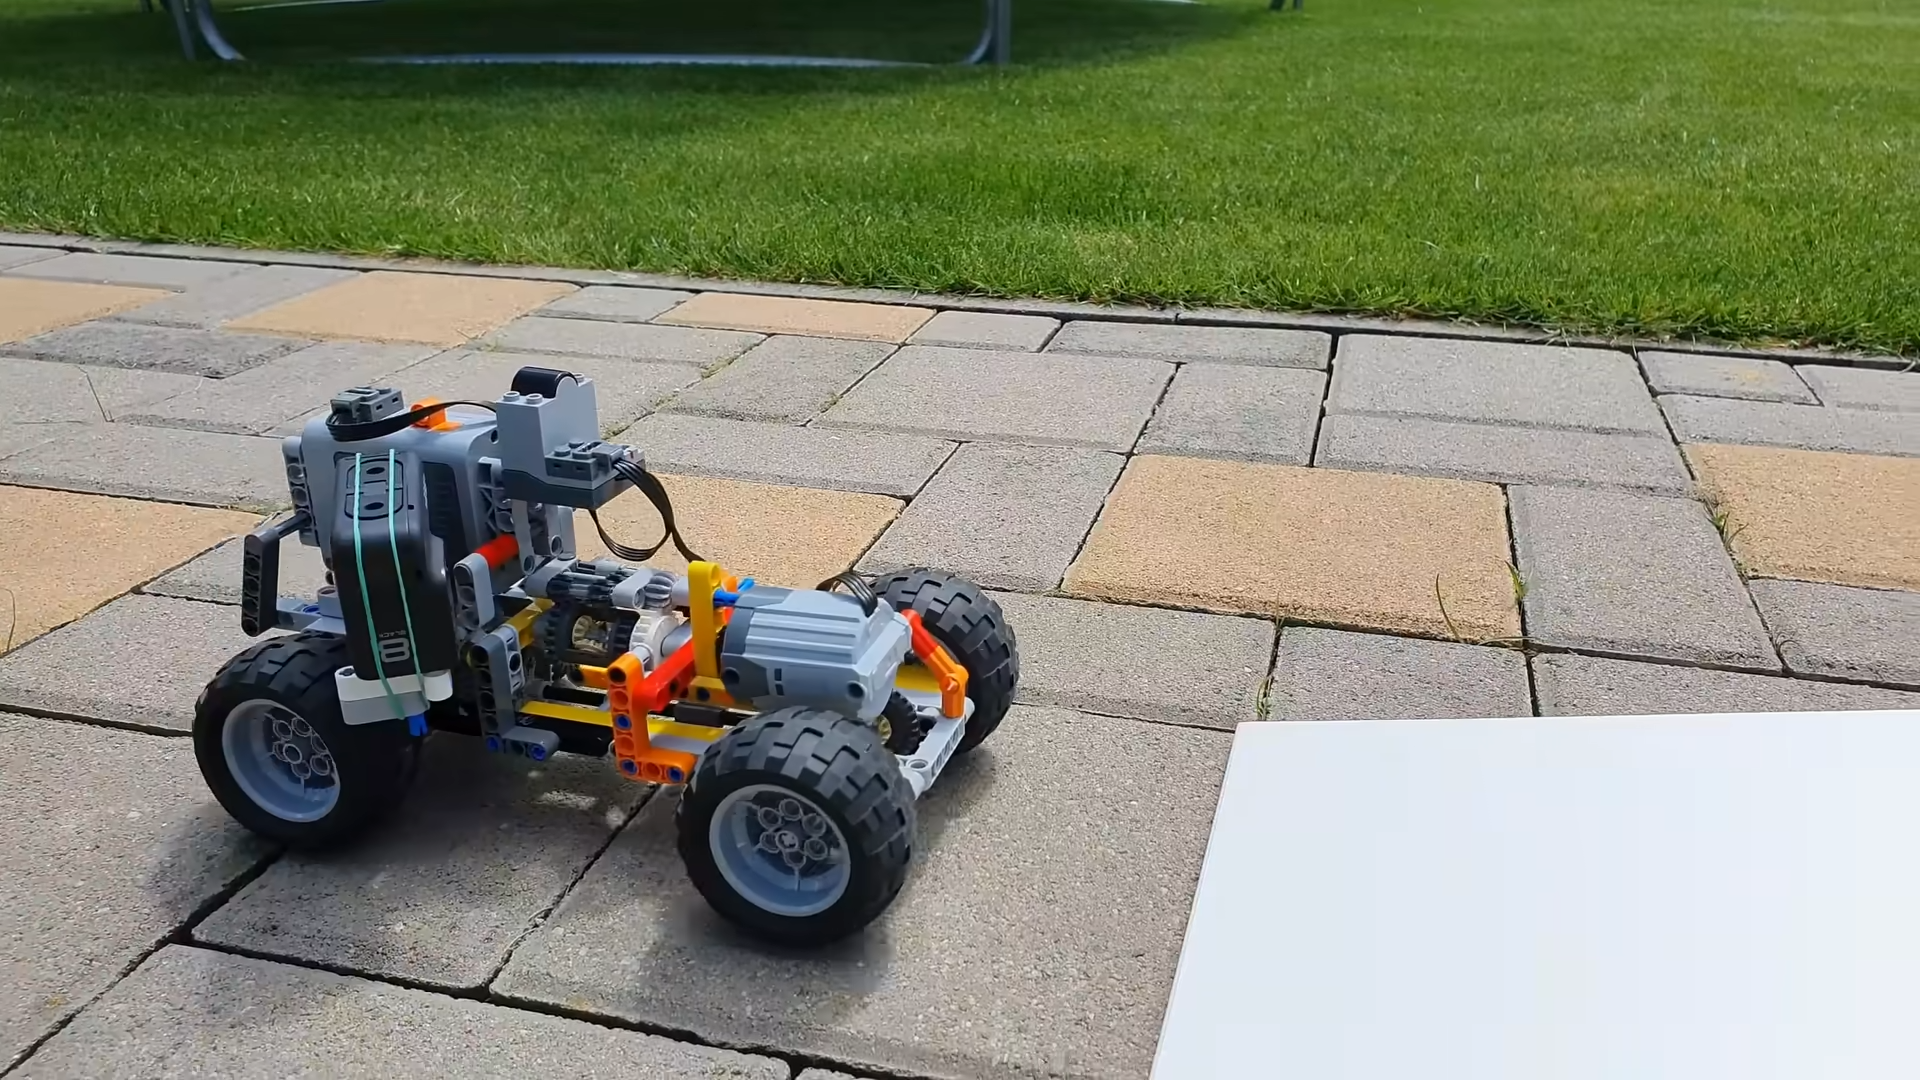 Scorch Brawl nuttet A Simple LEGO Automatic Transmission | Hackaday